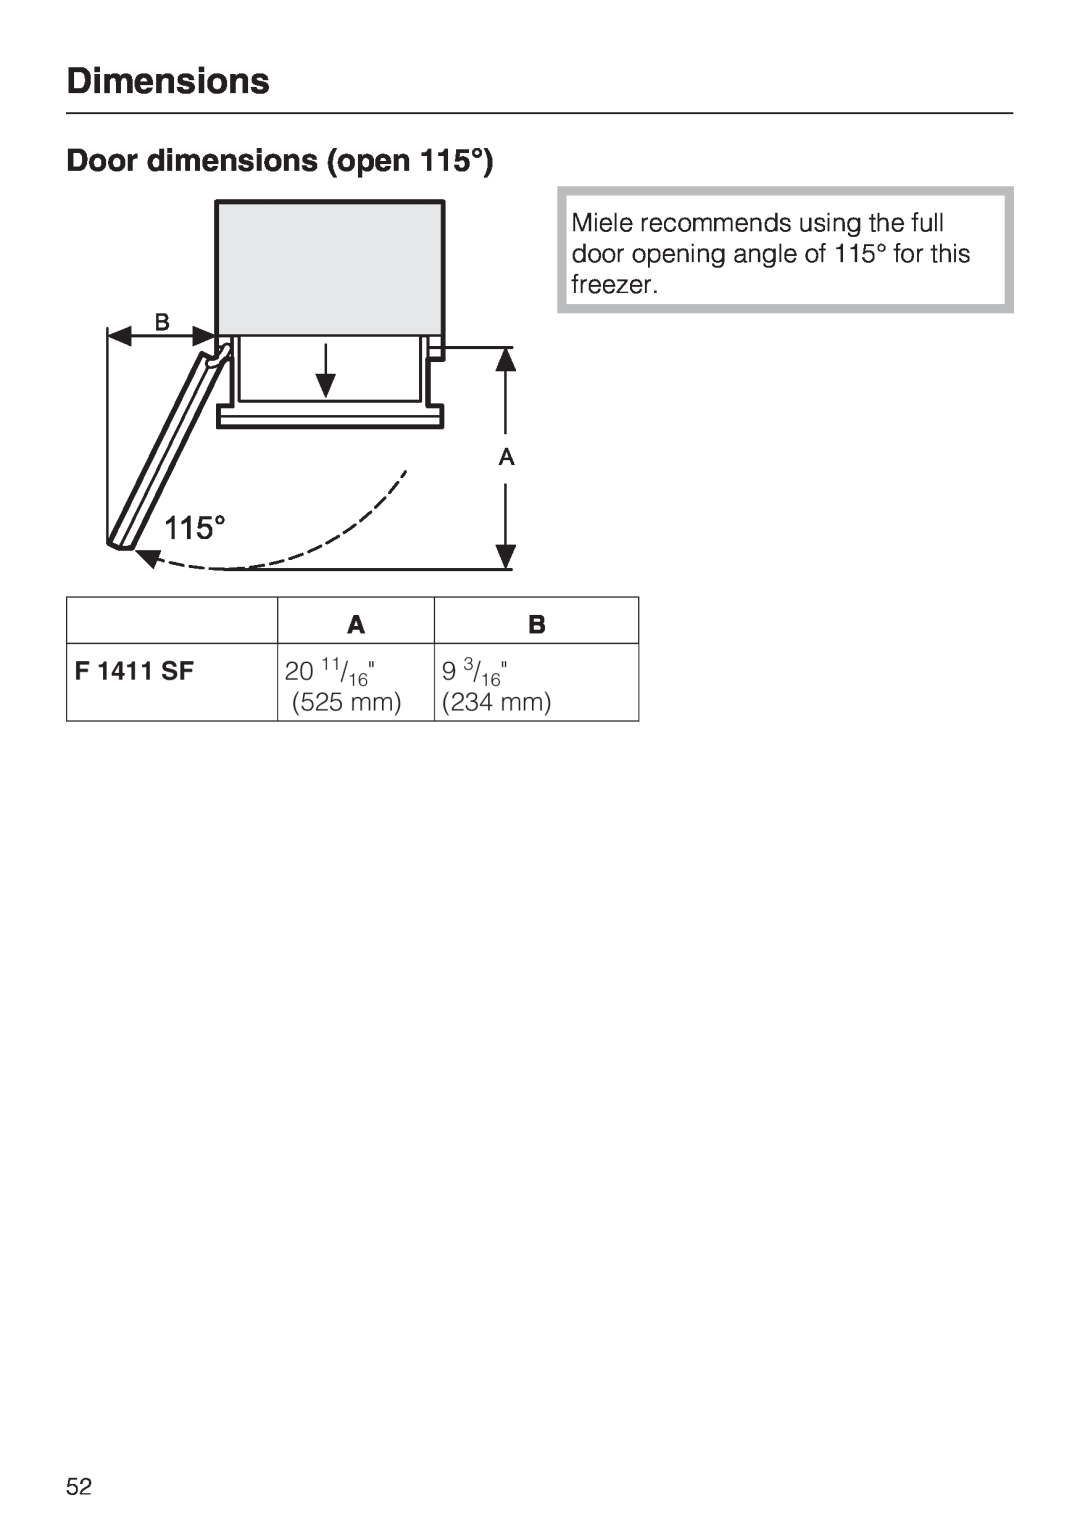 Miele F 1411 SF installation instructions Door dimensions open, Dimensions, 525 mm, 234 mm 